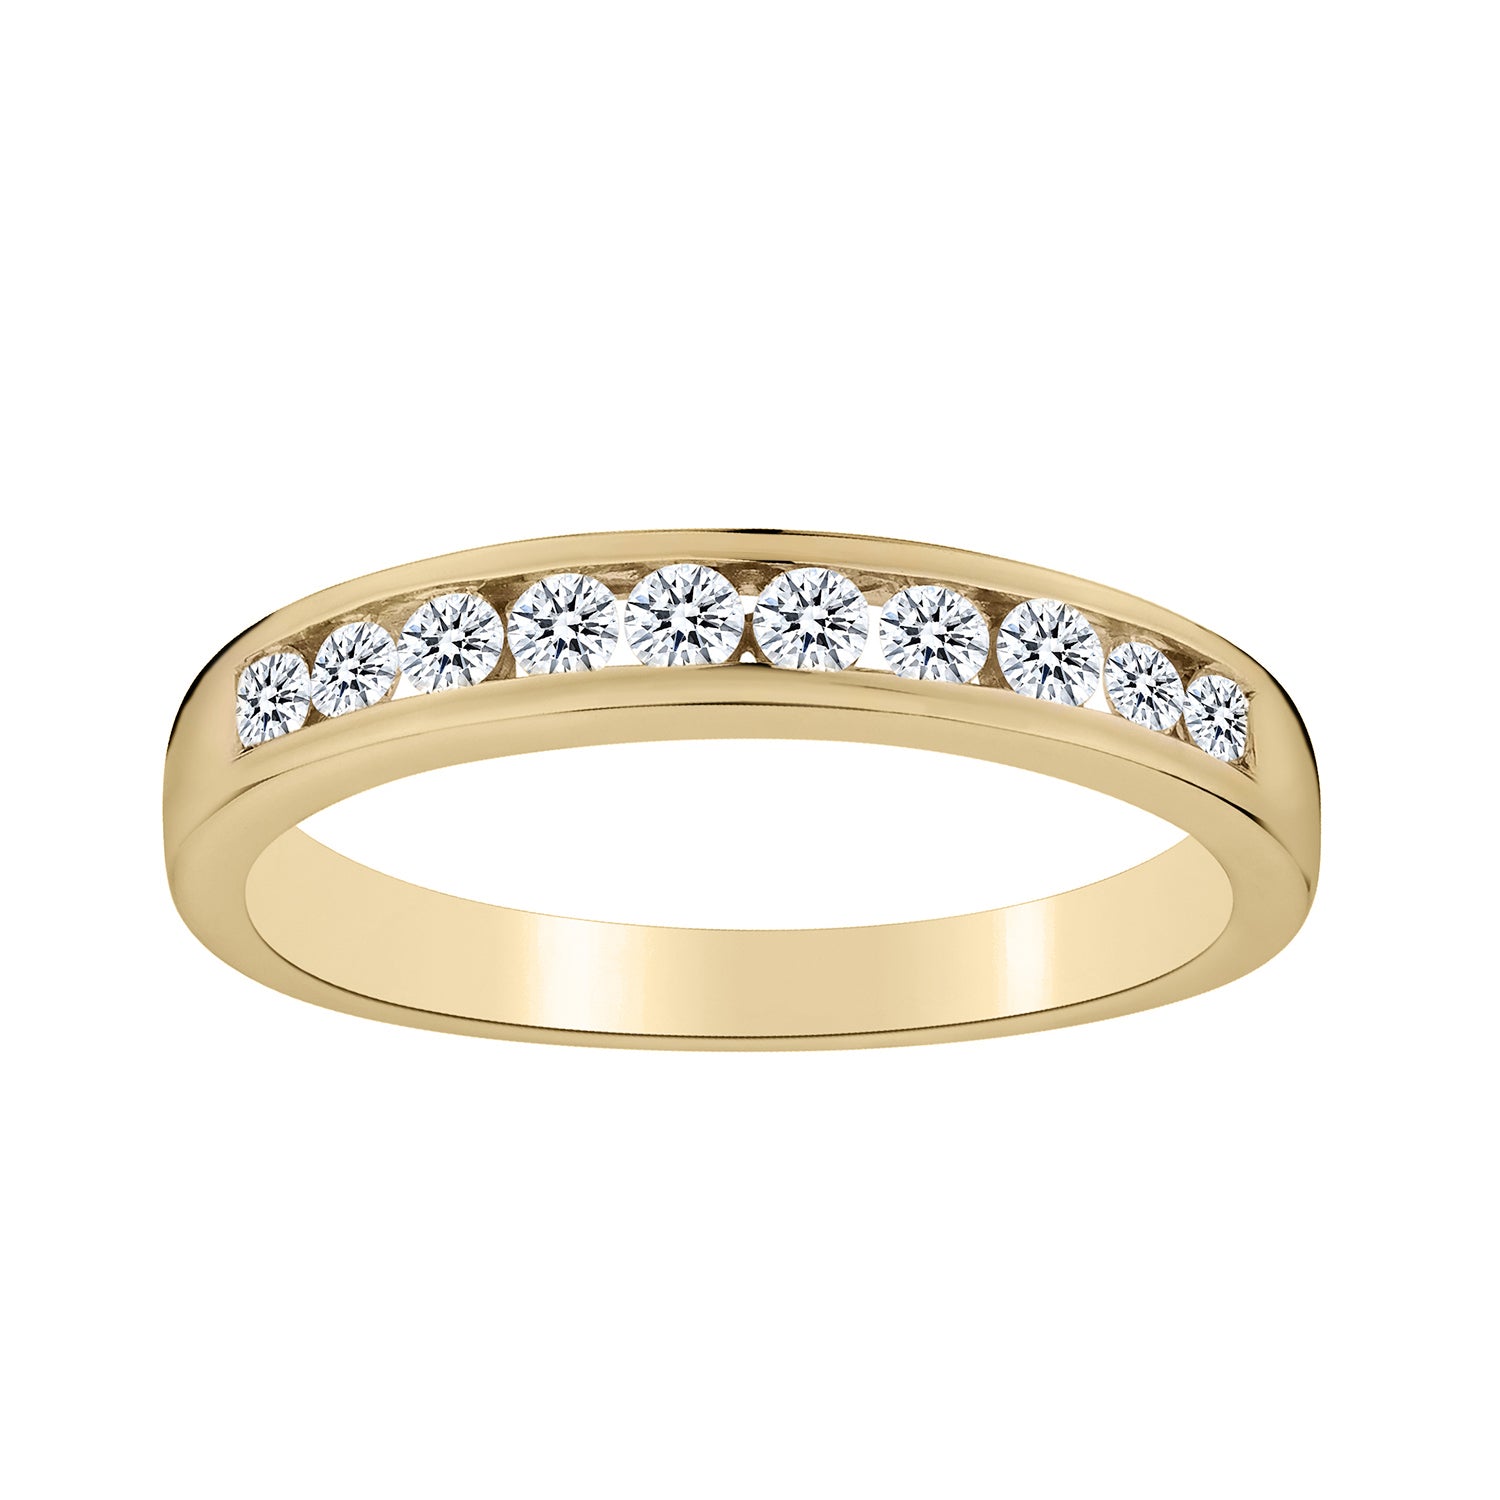 .33 Carat of Diamonds Ring Band, 10kt Yellow Gold....................NOW